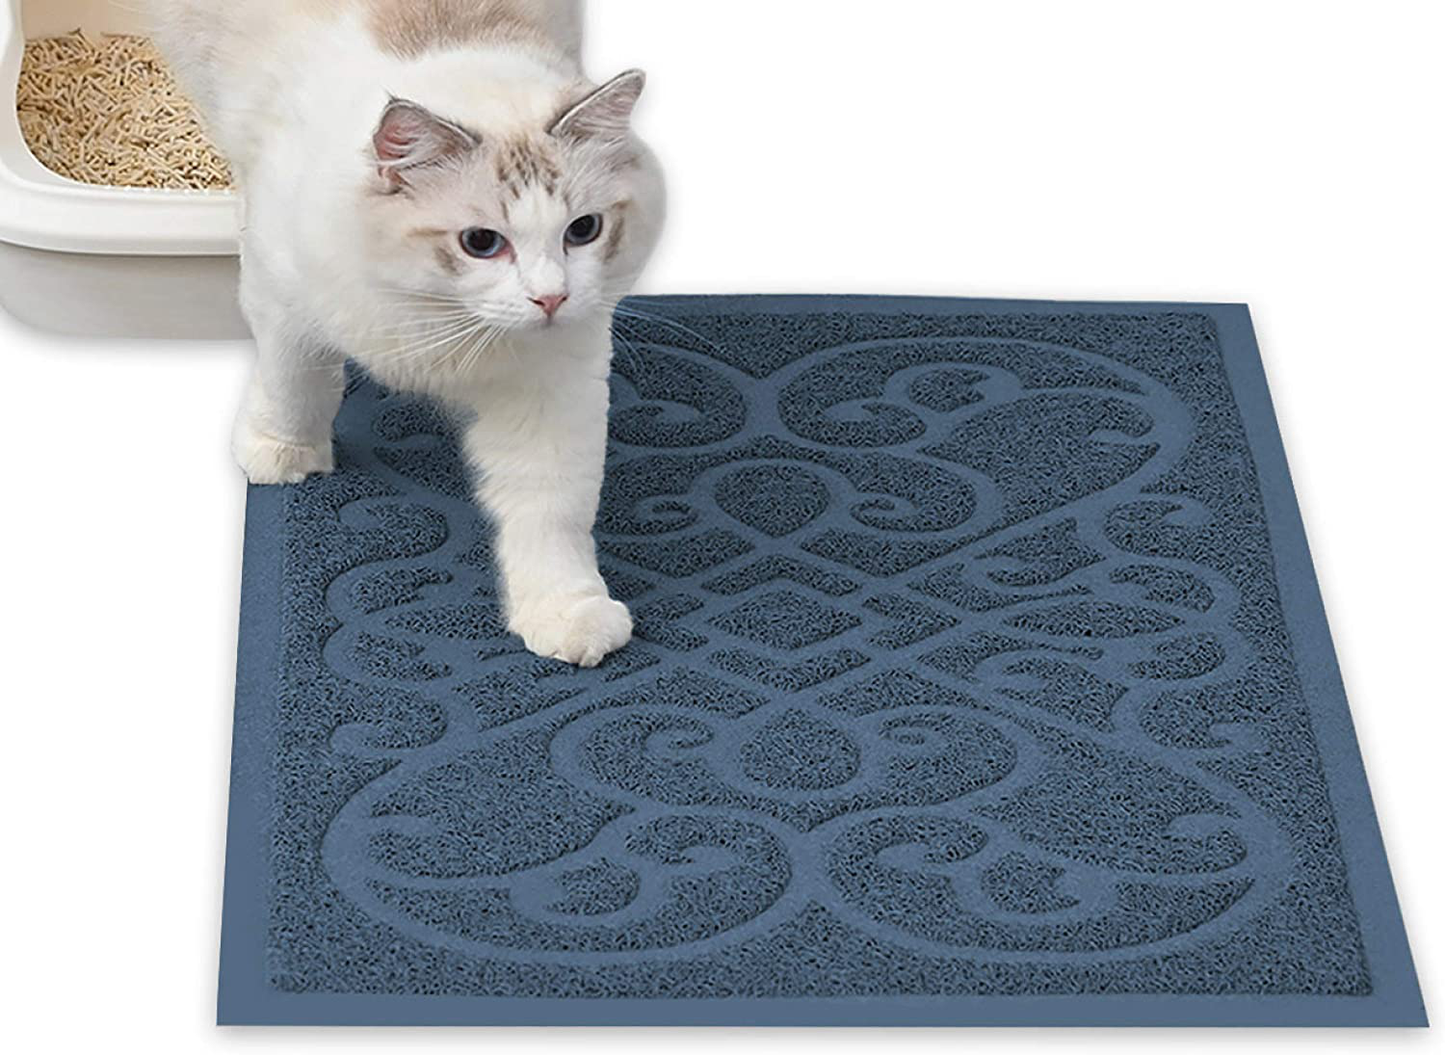 Petlike Cat Litter Mat Kitty Litter Trapping Mat, Durable Cat Litter Box Mat Waterproof, Phthalate Free, 3 Size Mats with Non-Slip Bottom, Soft on Kitty Paws, Easy to Clean